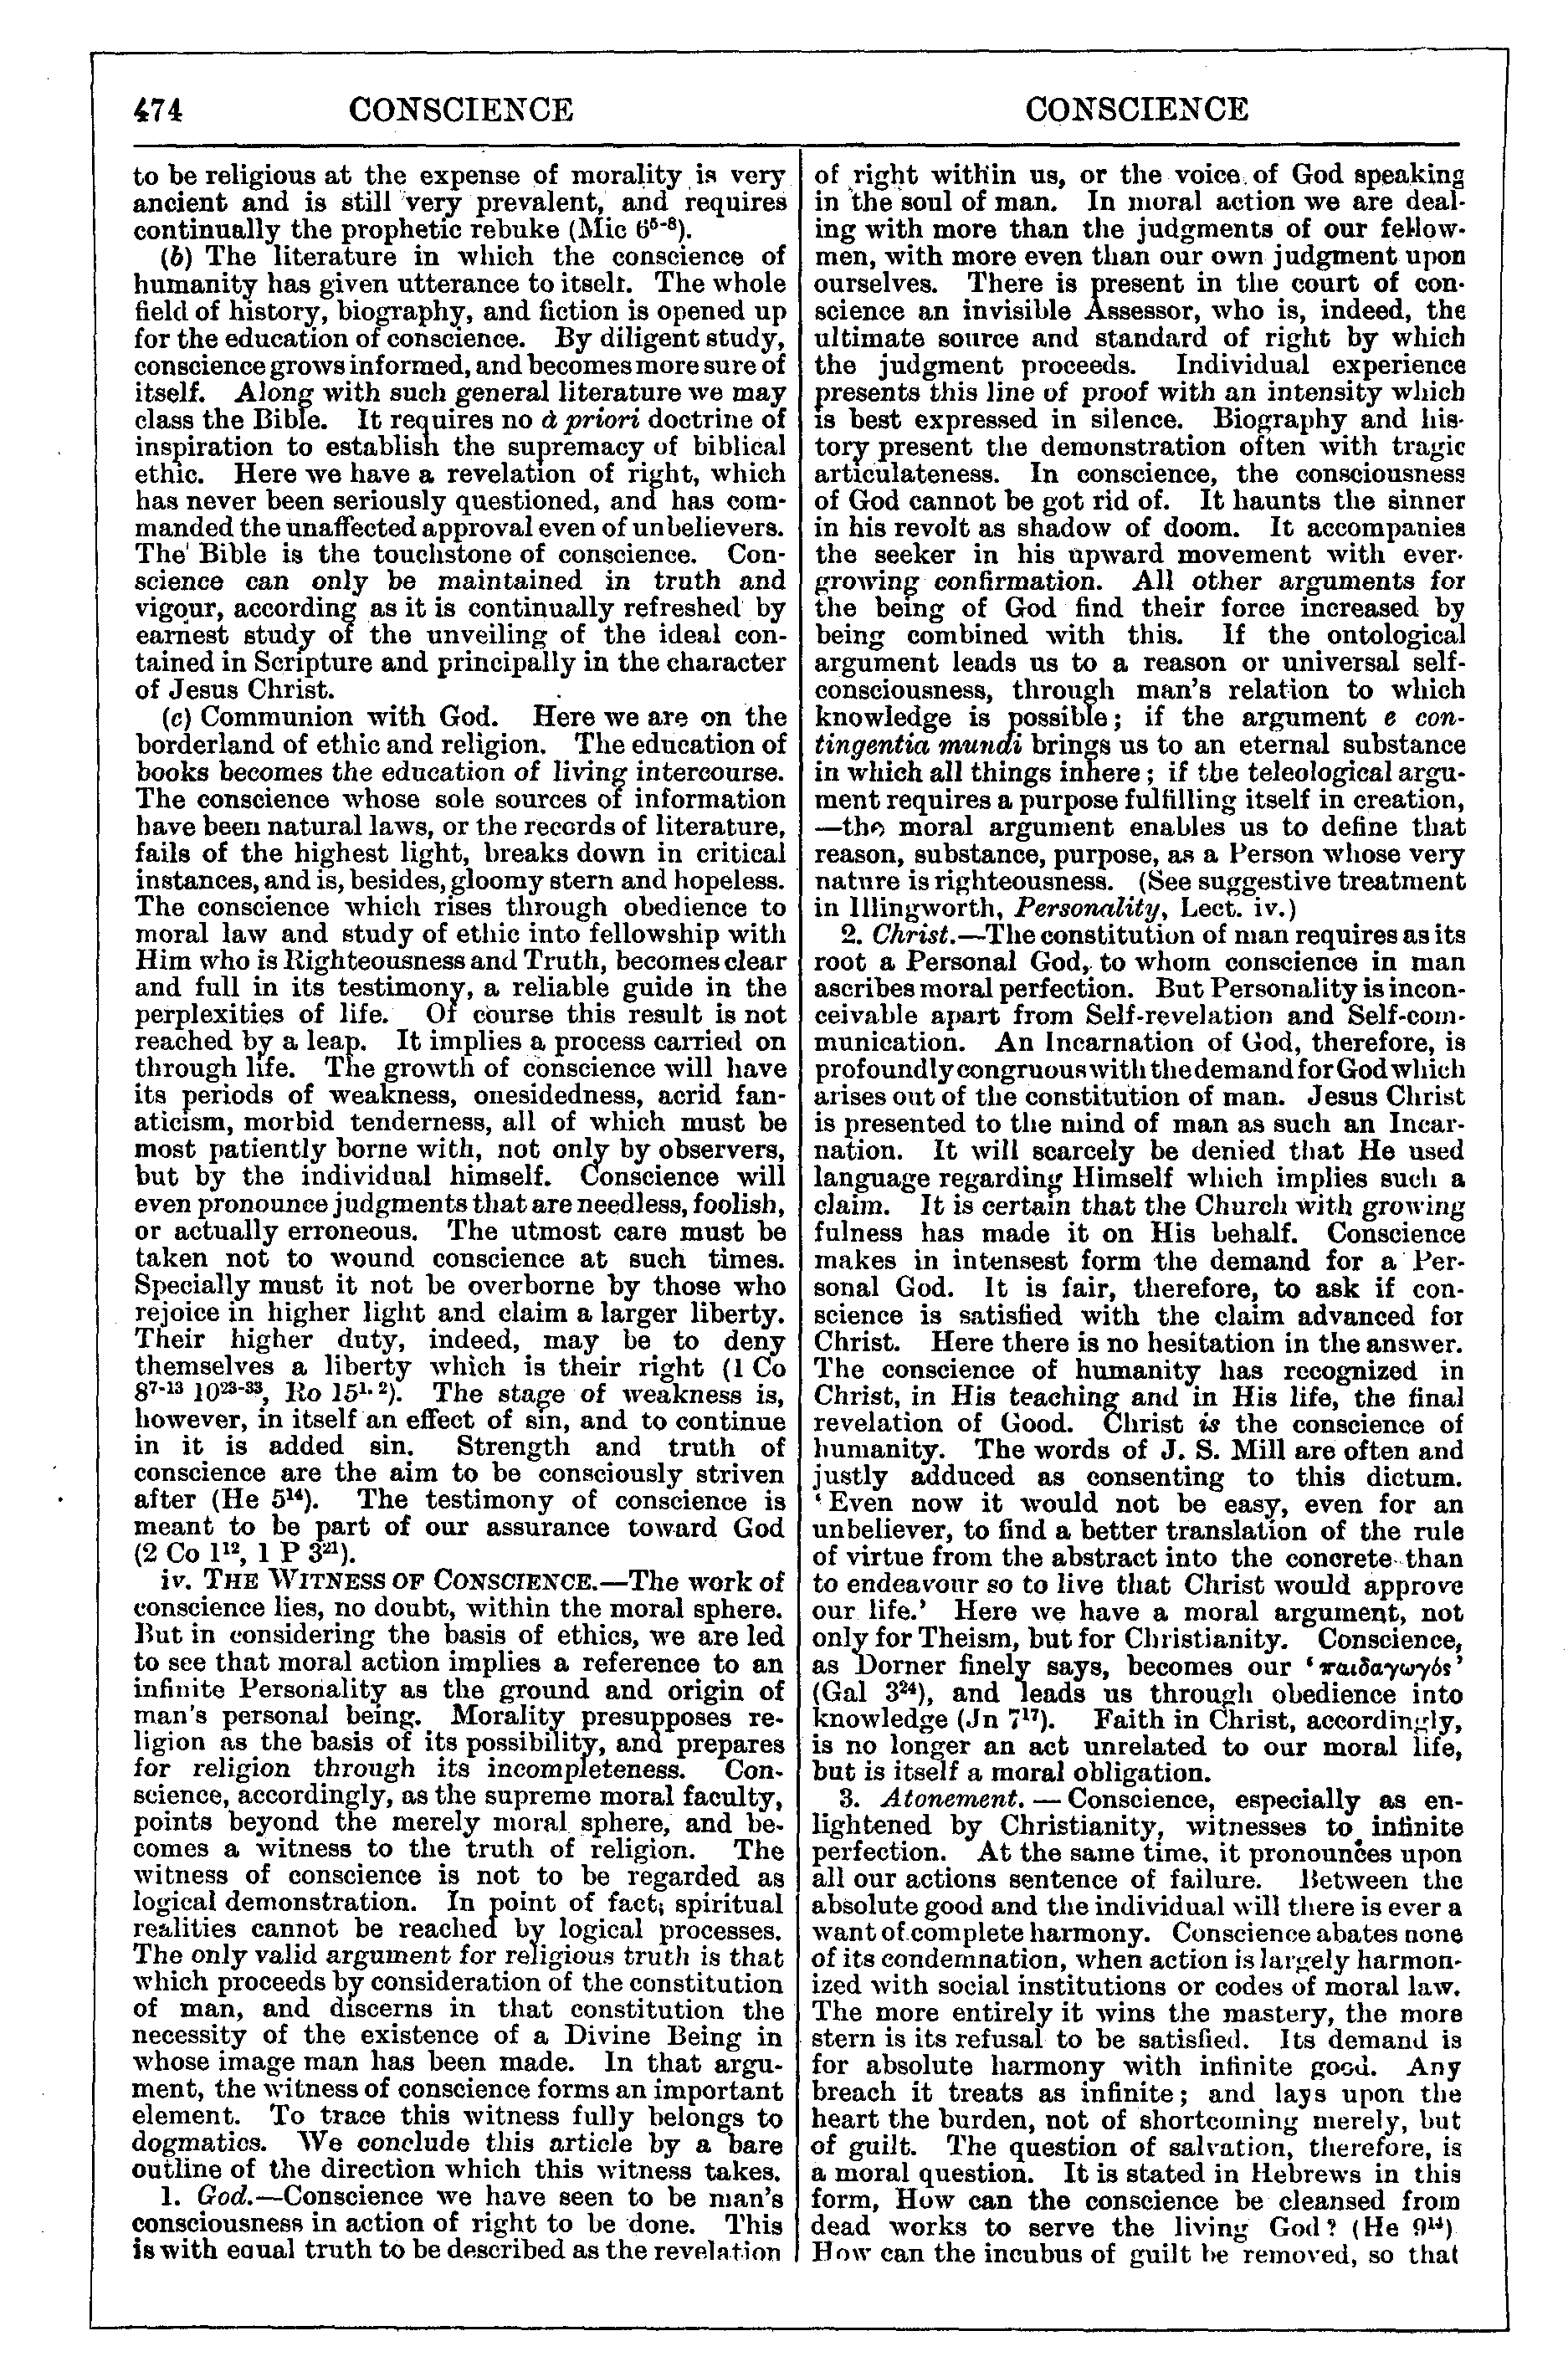 Image of page 474